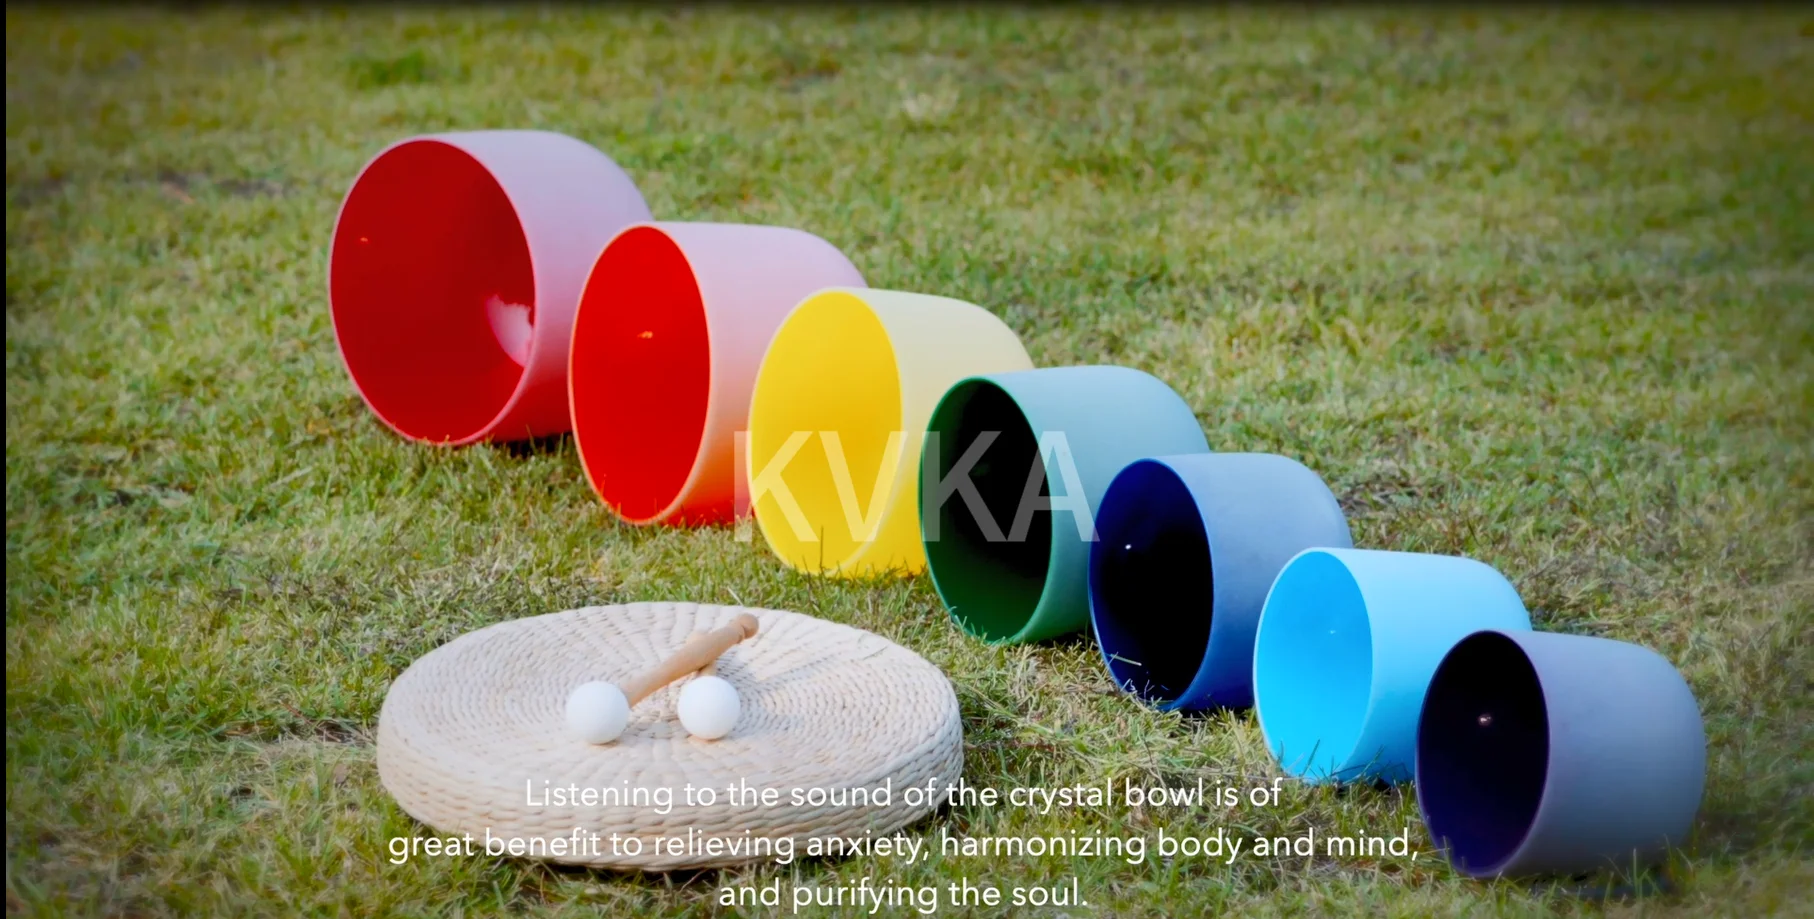 

【High quality product】KVKA 6"-12" Note CDEFGAB Colored set of 7PCS Chakra Frosted Quartz Crystal Singing Bowl with best sound